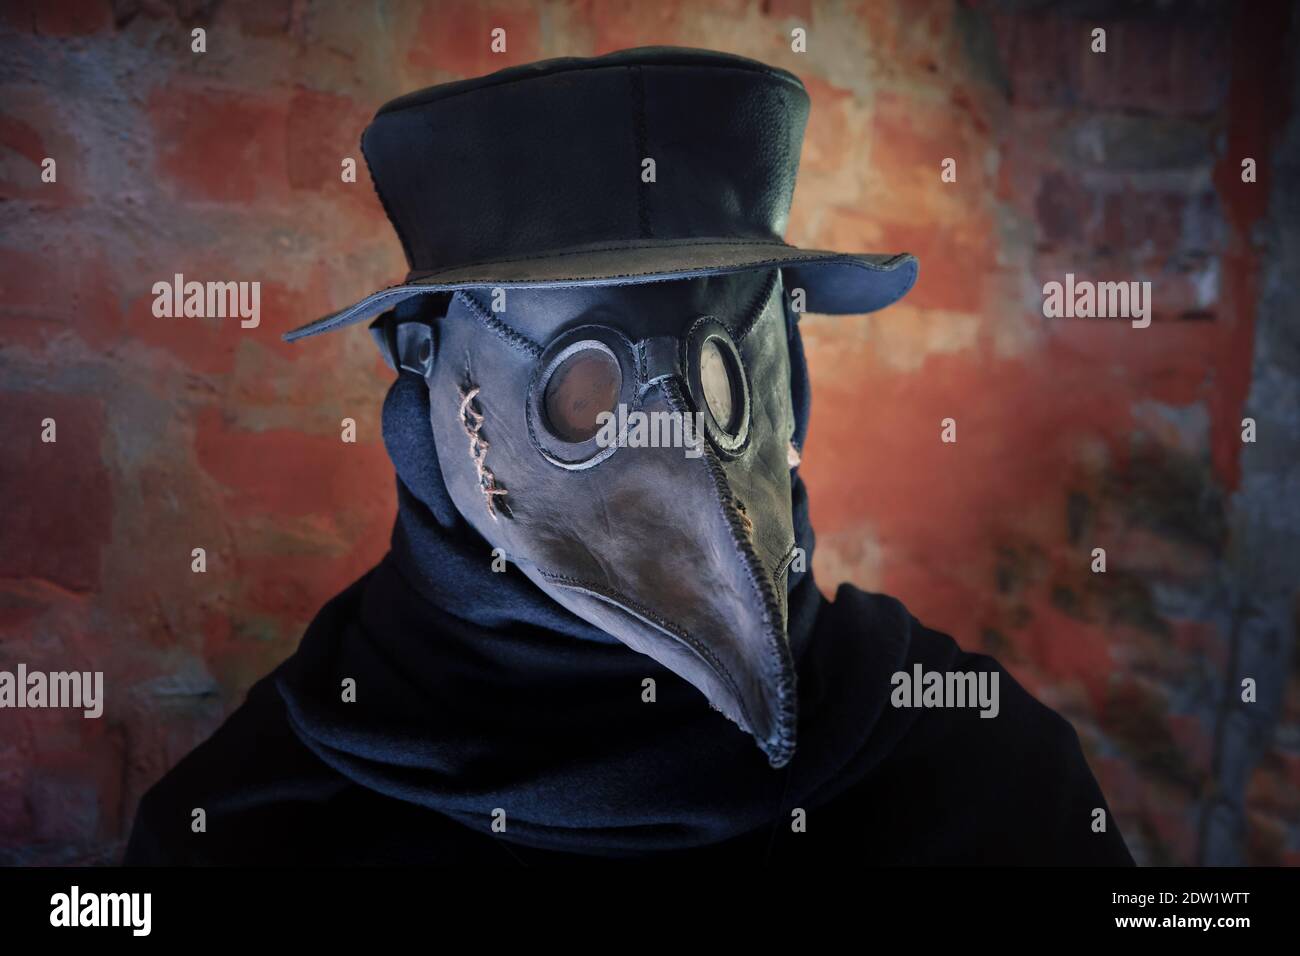 Plague mask, hat and costume of medieval Doctor. Stock Photo